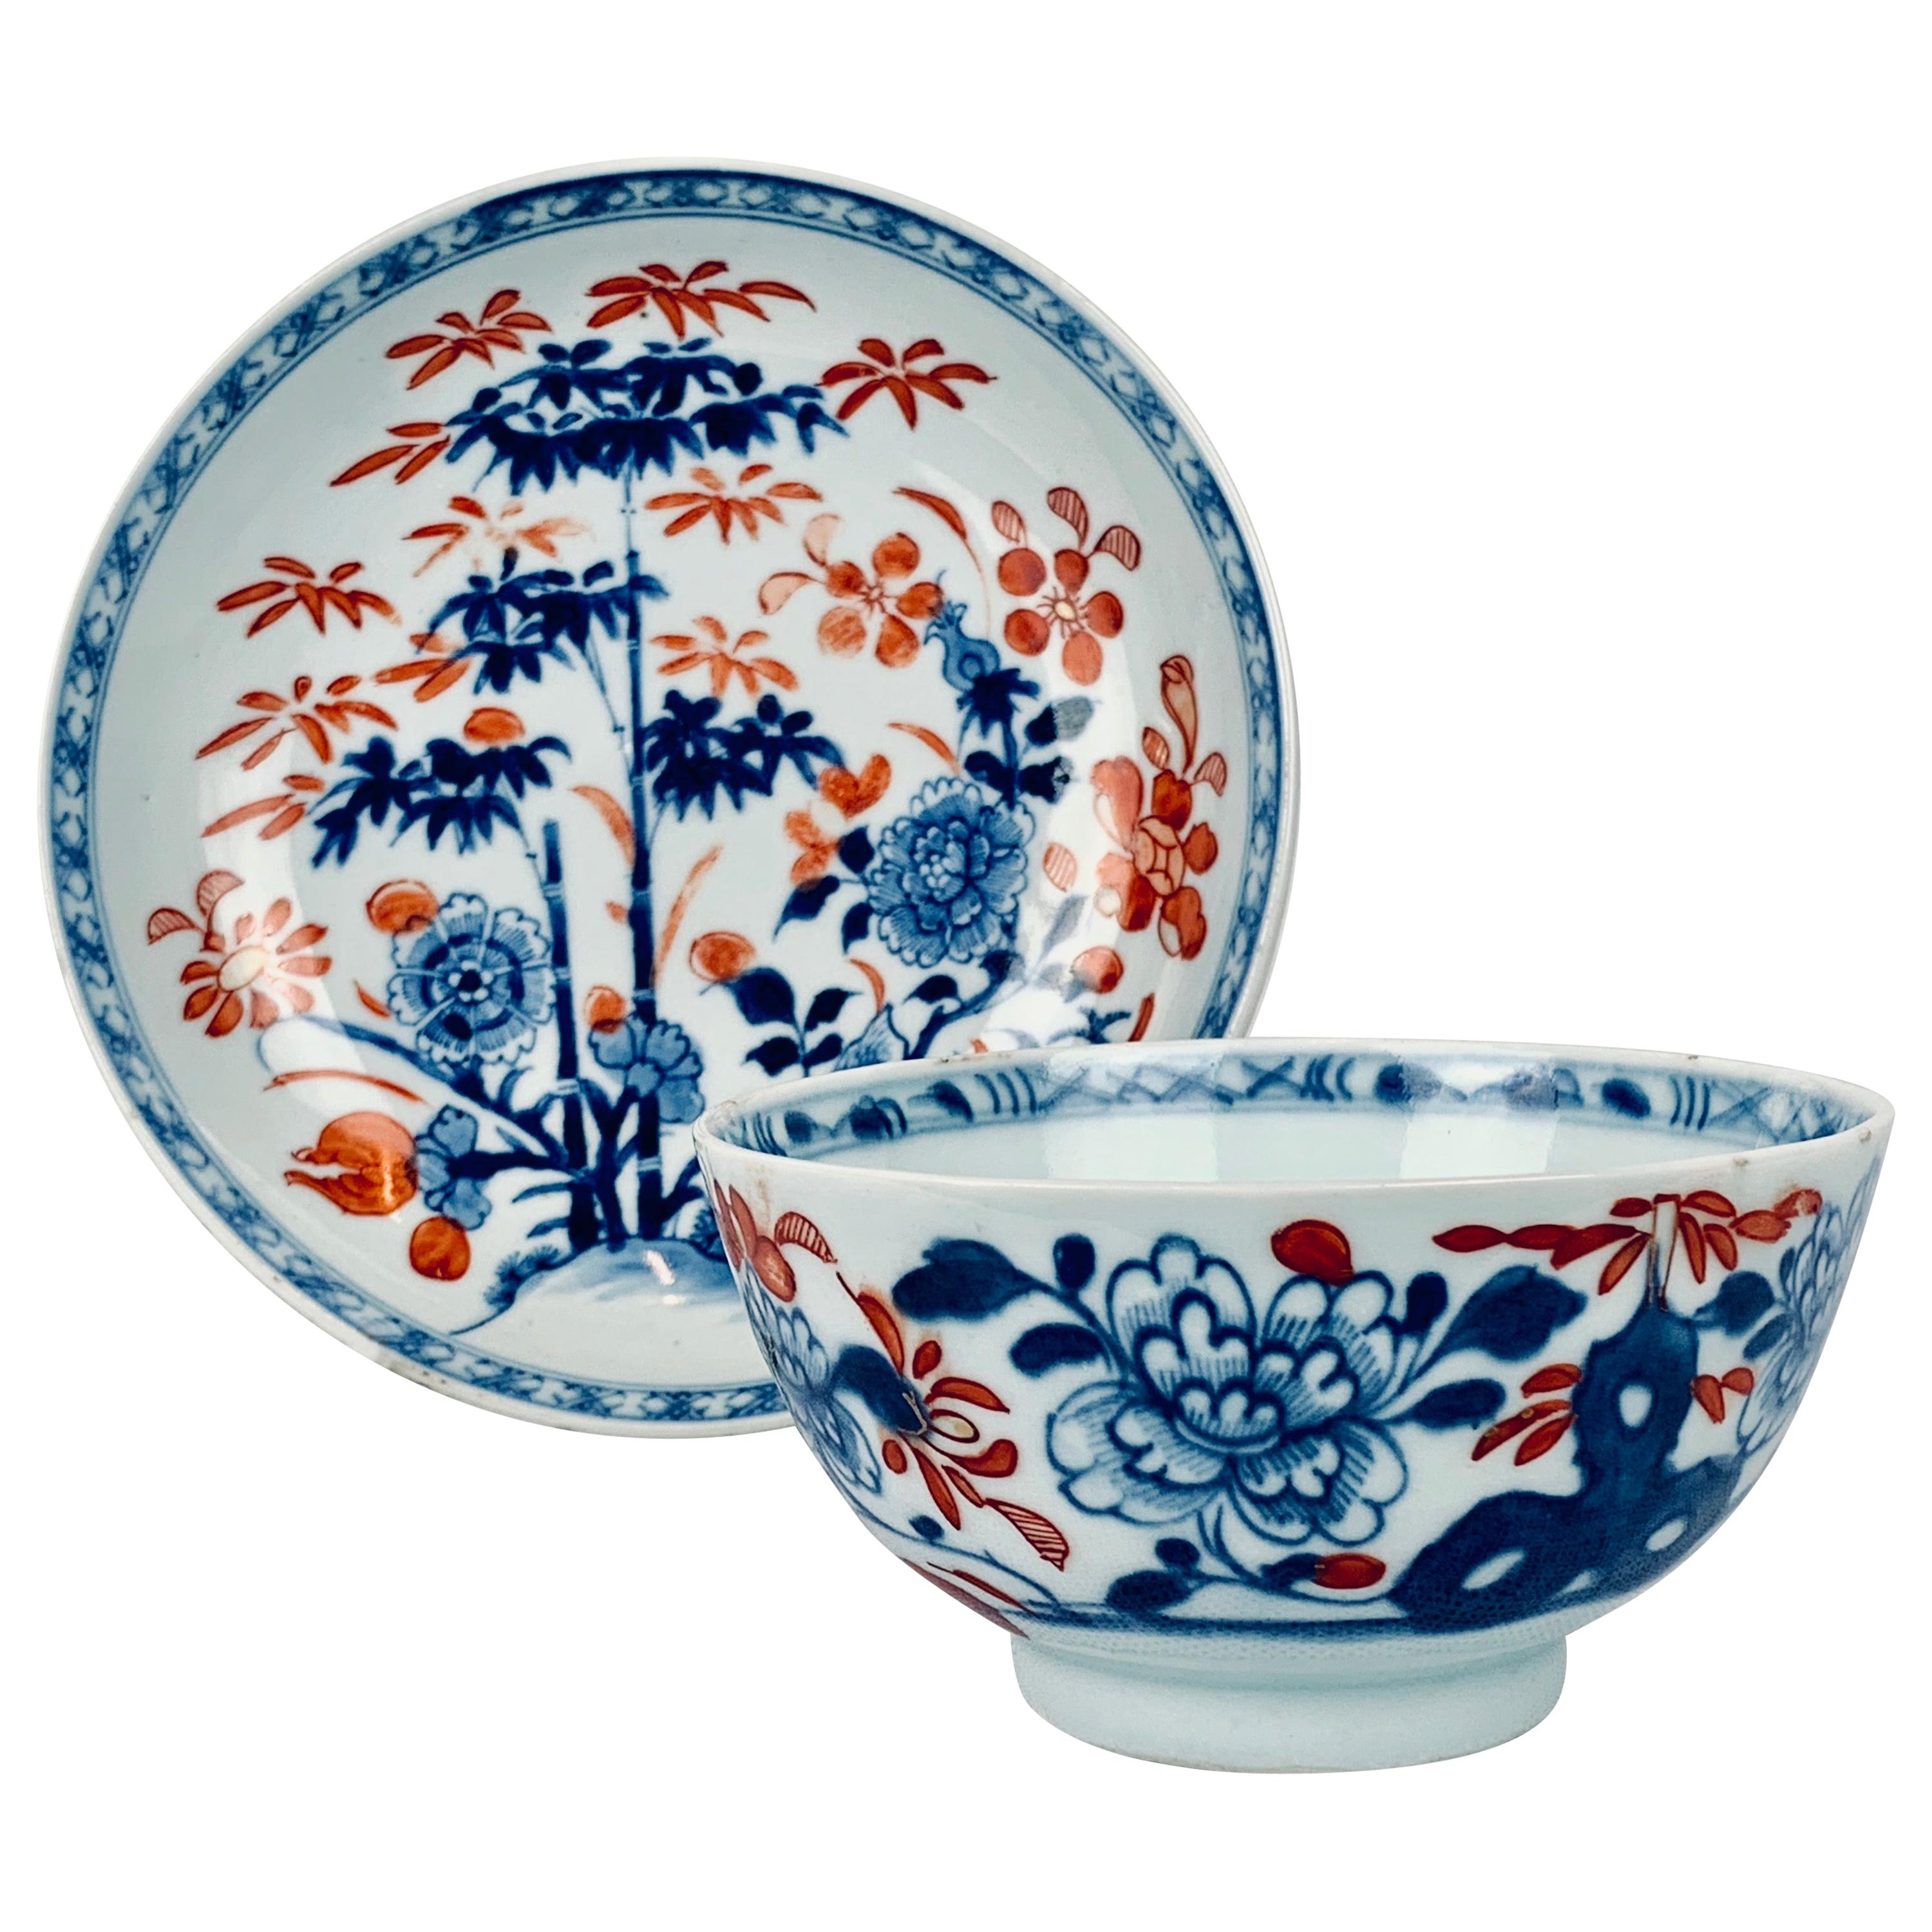 Export Porcelain Handless Tea Bowl and Saucer in the Chinese Imari Pattern